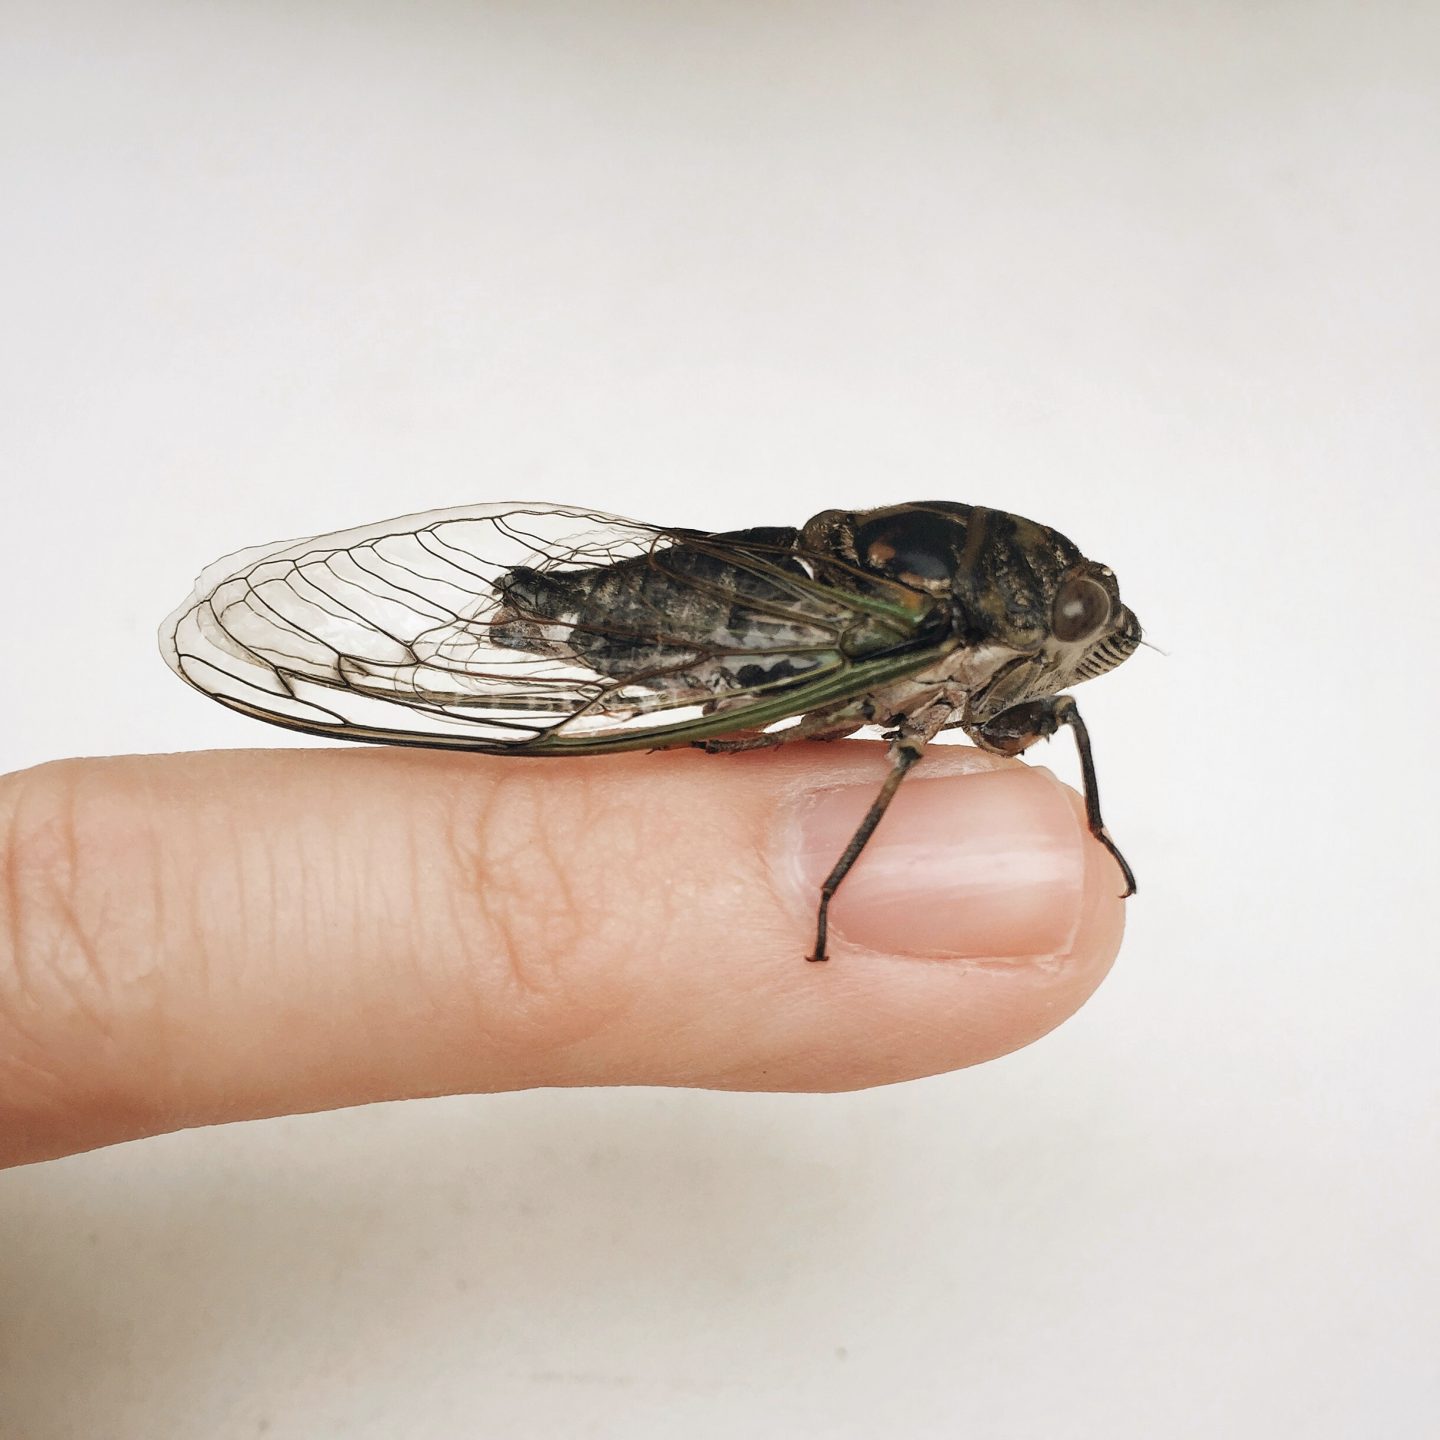 What’s the buzz? Cicadas end their larval stage on strict 13- or 17-year cycles.